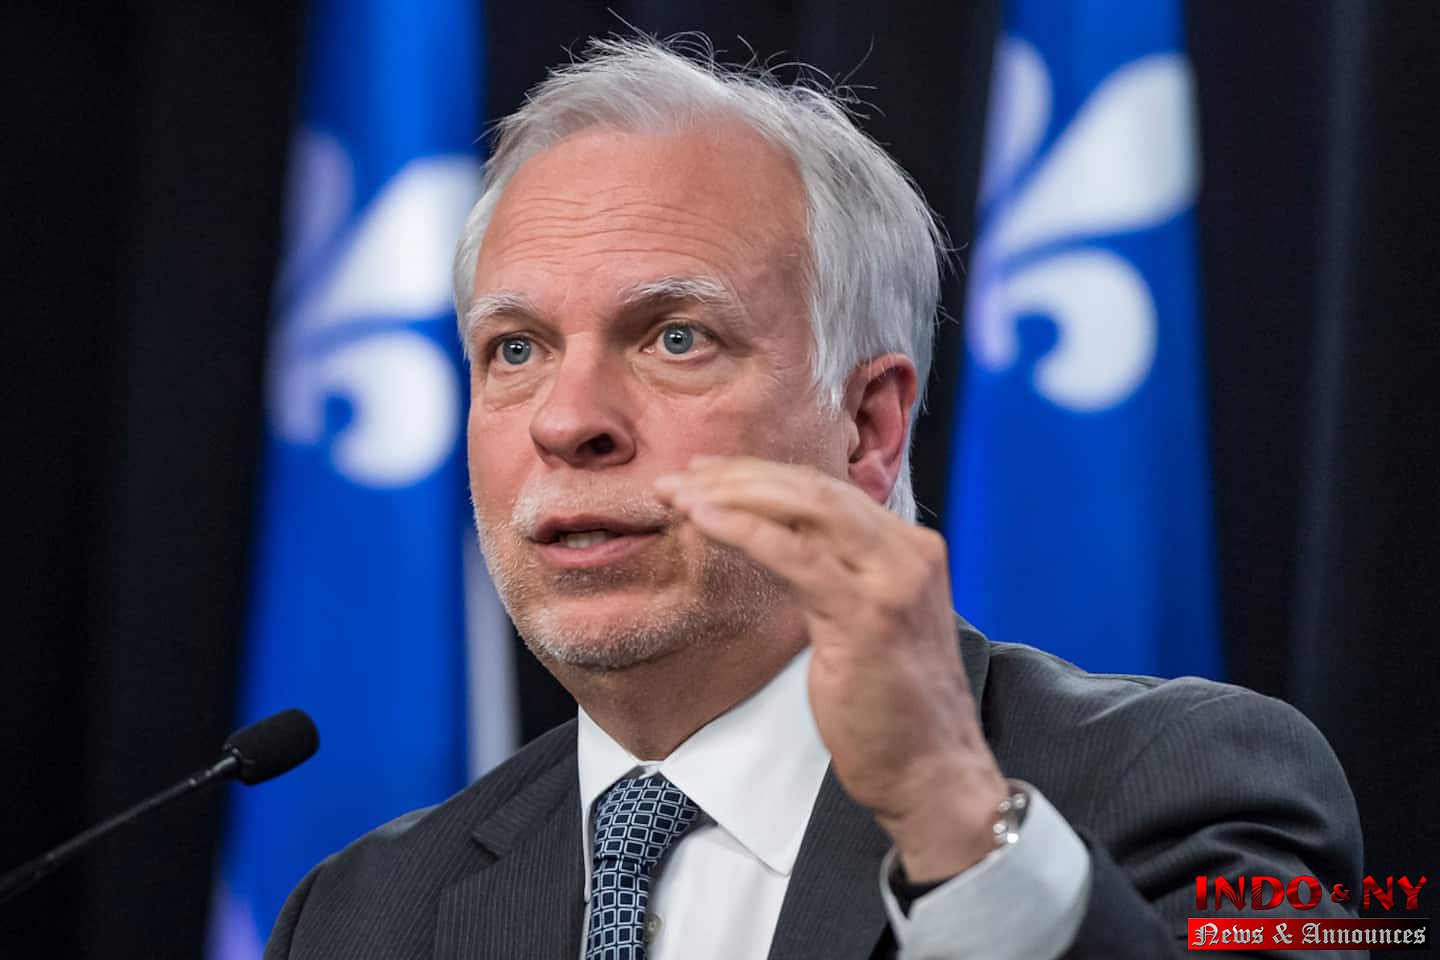 COVID-19: the health situation “is going in the right direction” in Quebec